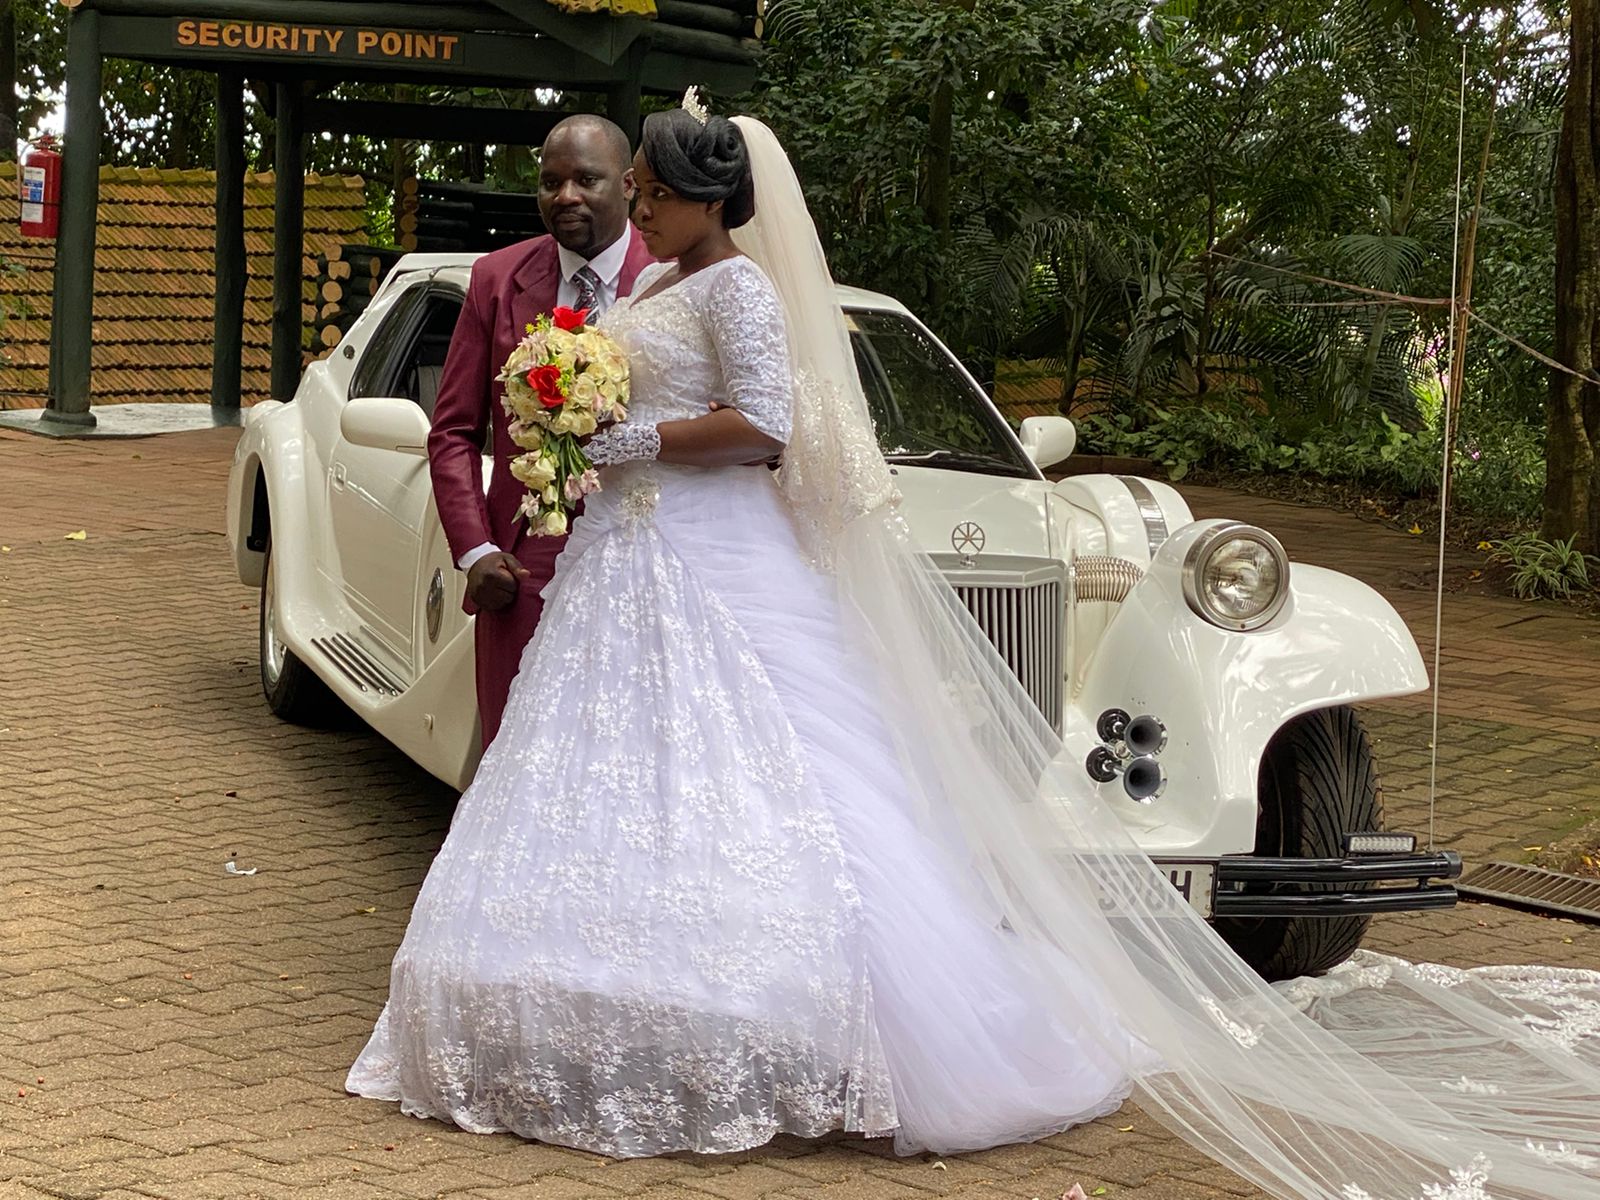 Why Hire A Wedding Car From A Company Over Friends/Family